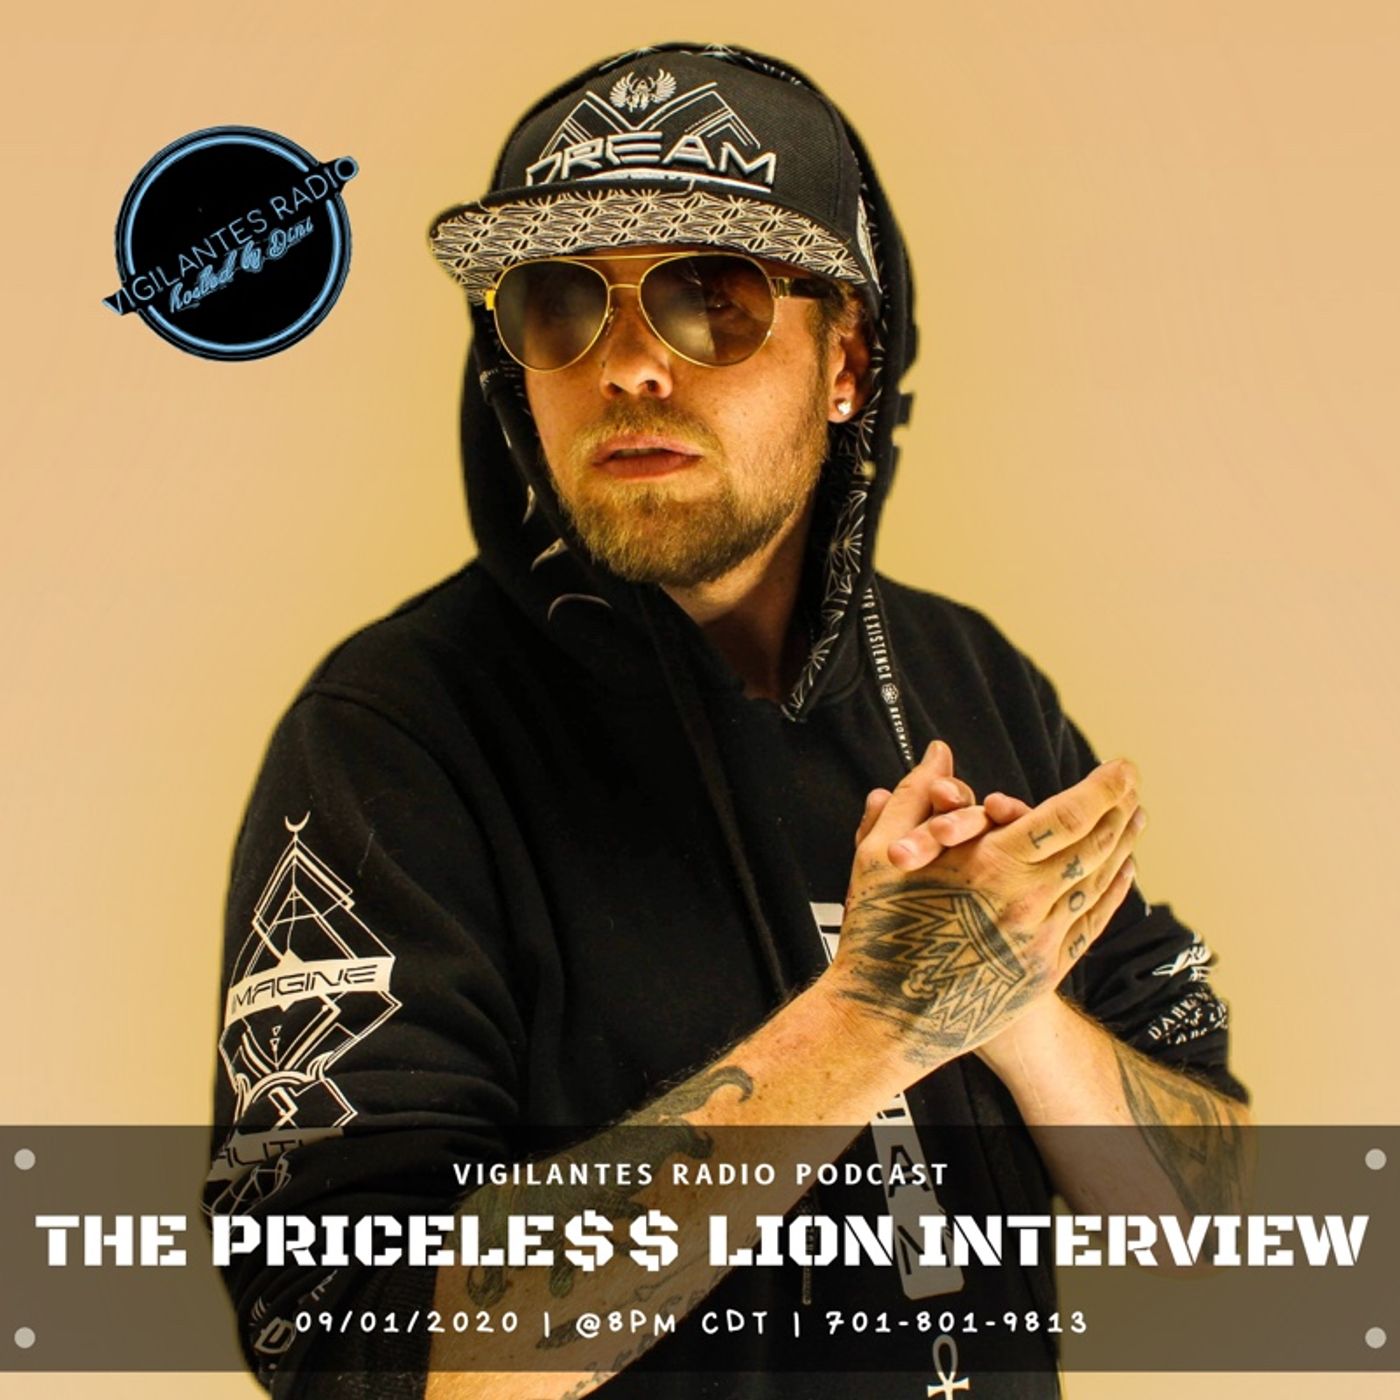 The Pricele$$ Lion Interview. Image